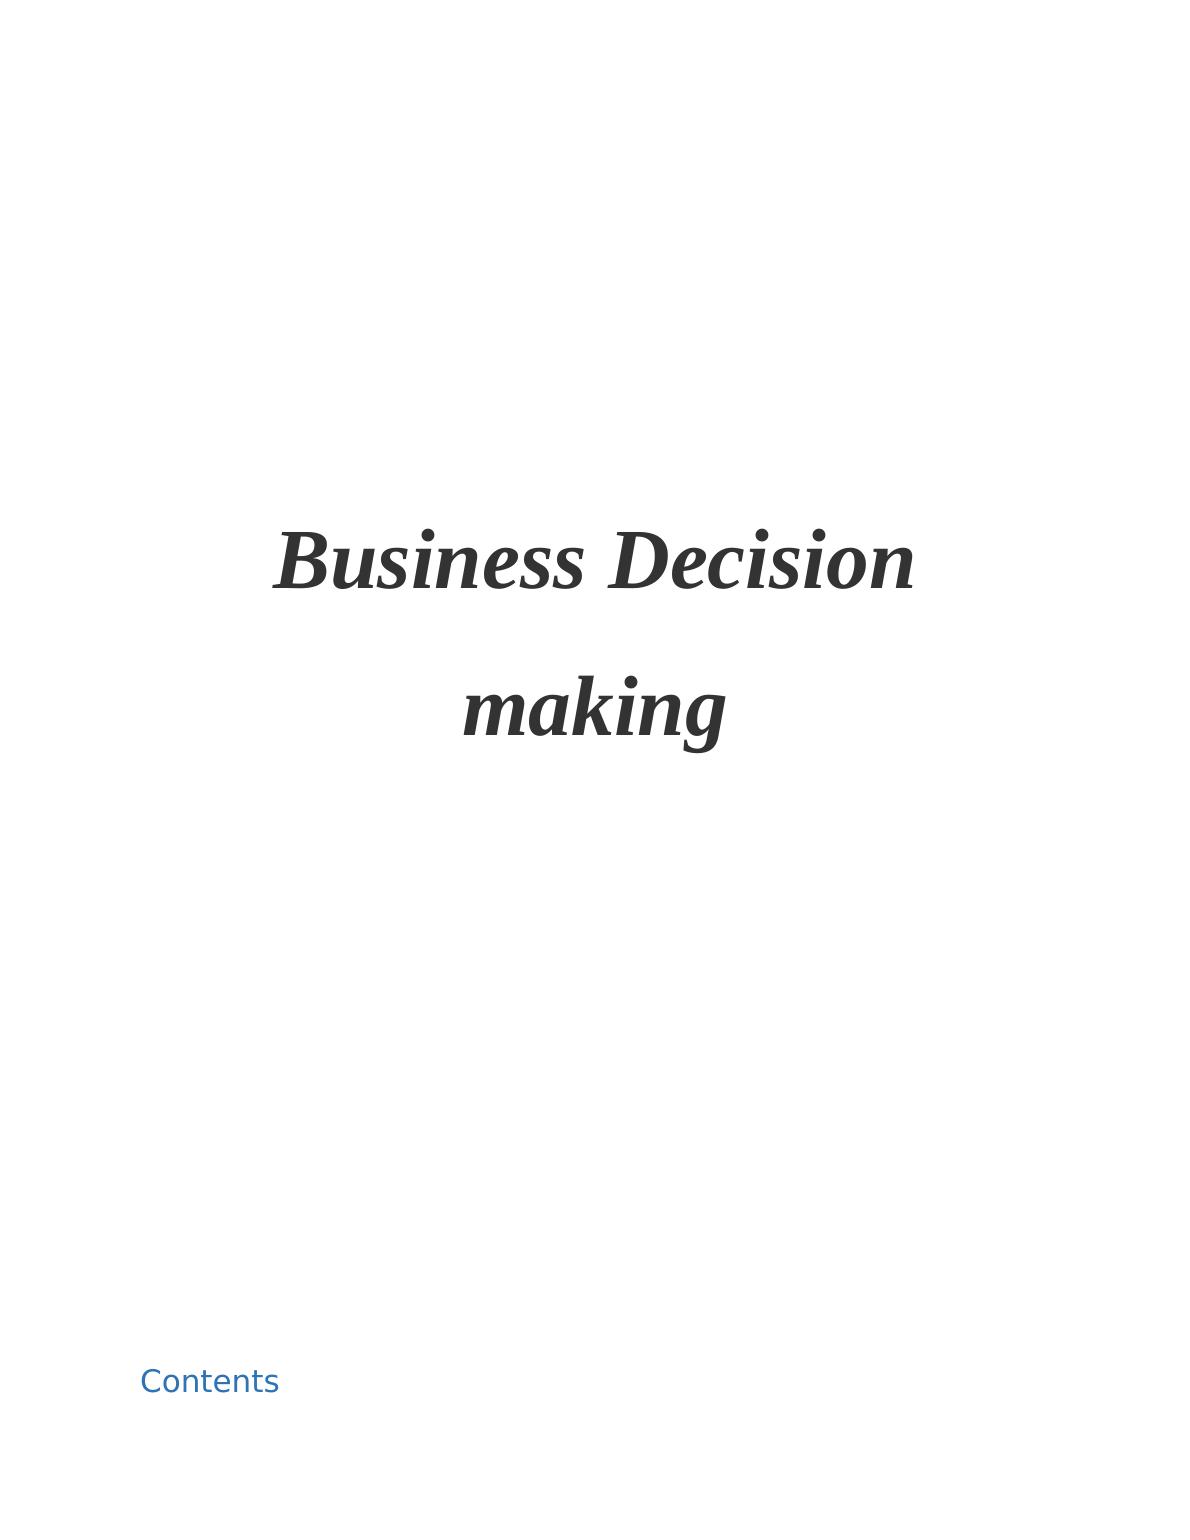 Unit 6 Business Decision Making Tools Report_1